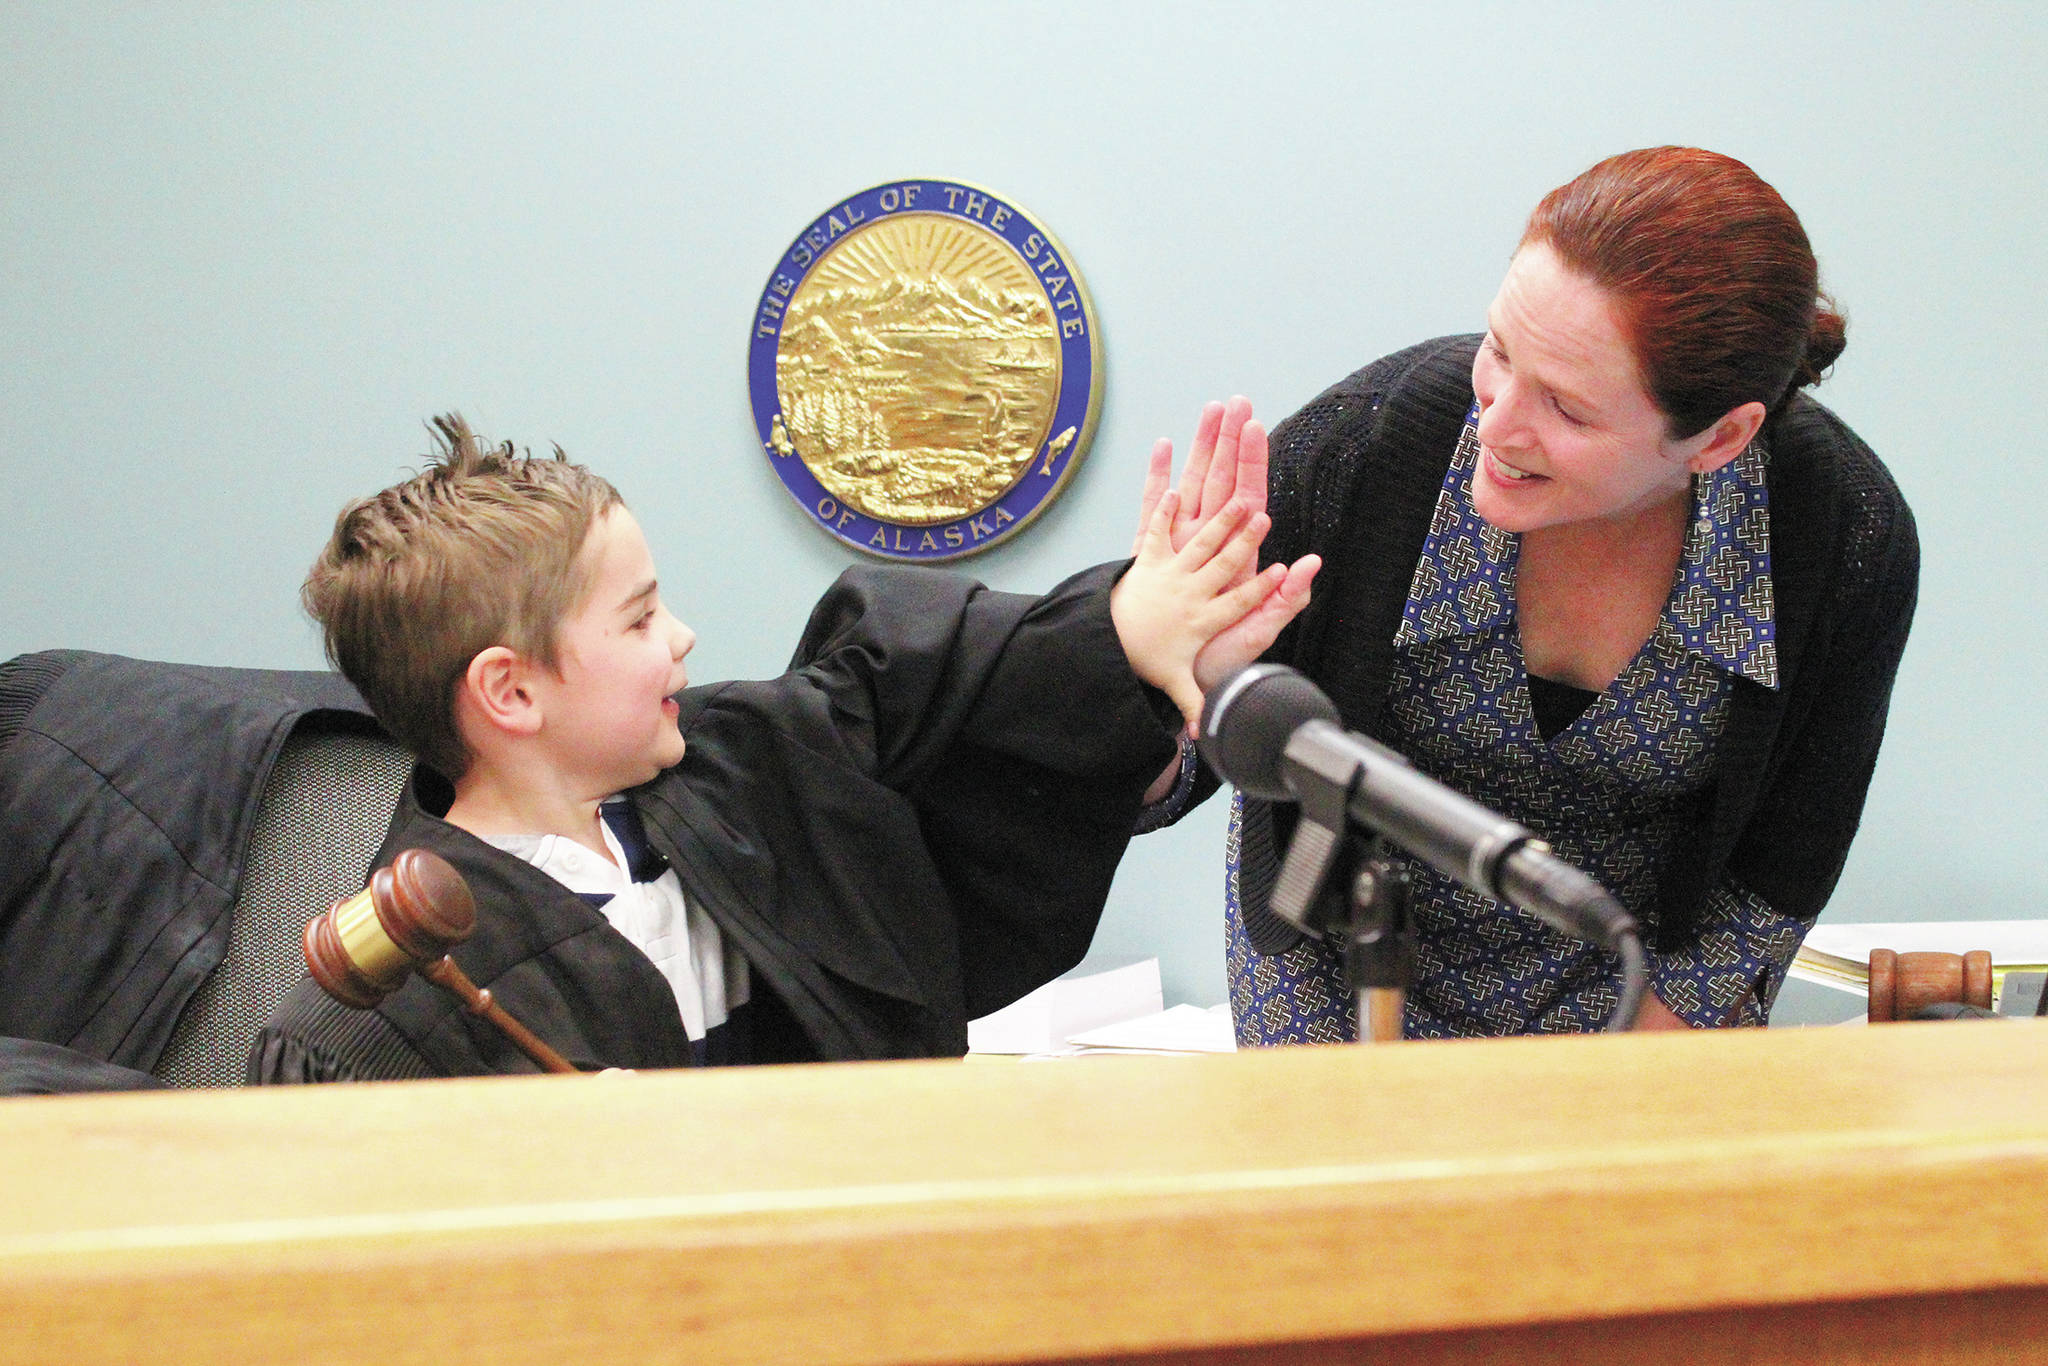 Bride Seifert, Homer’s first Superior Court judge, high fives 5-year-old Atticus Torres after he called for order in the courtroom during an an open house for the community Thursday, March 5, 2020 at the Homer Court in Homer, Alaska. (Photo by Megan Pacer/Homer News)